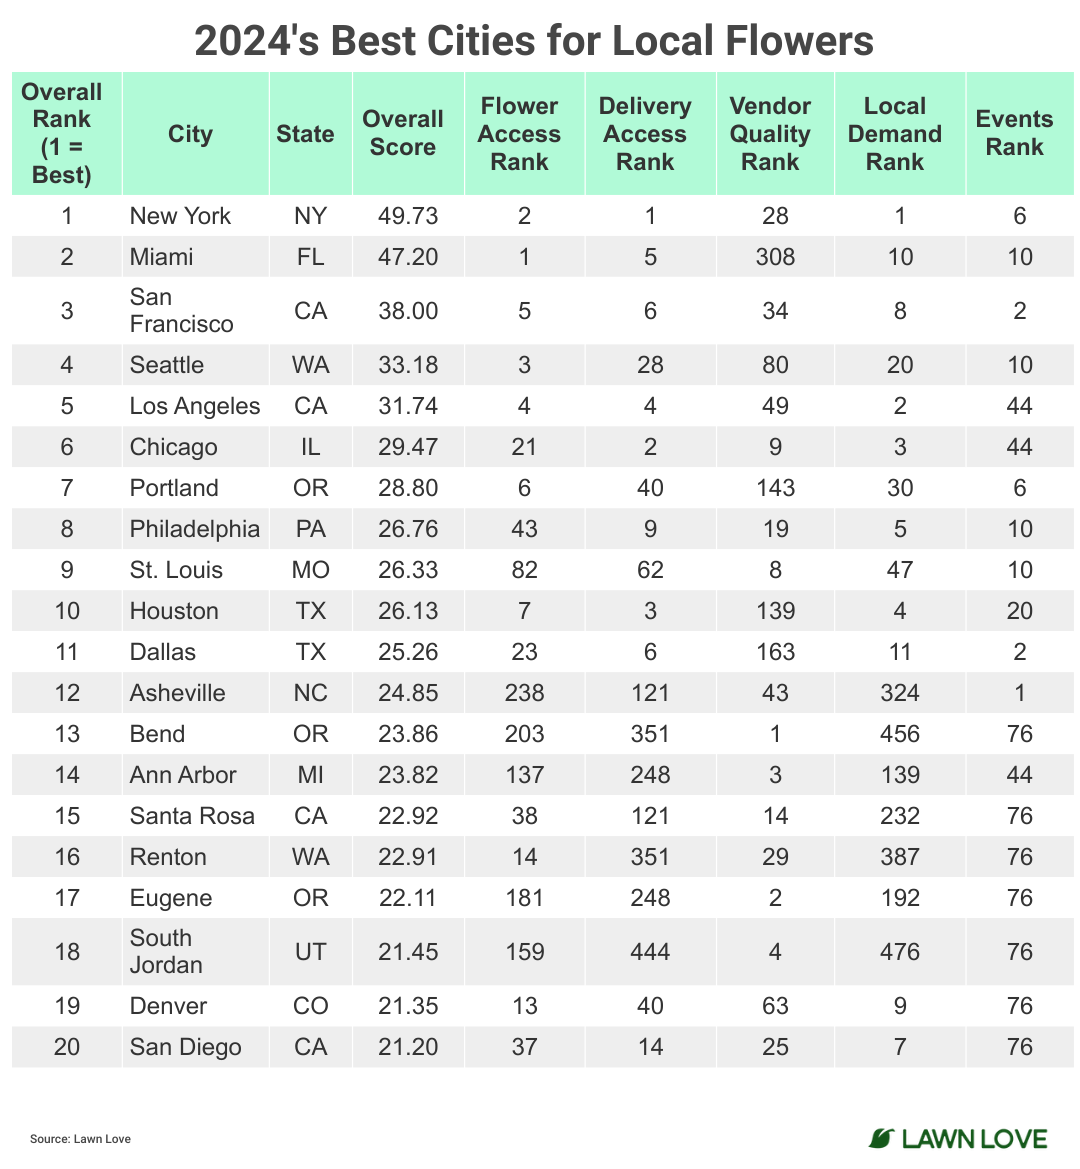 Table showing 2024's best cities for local flowers.